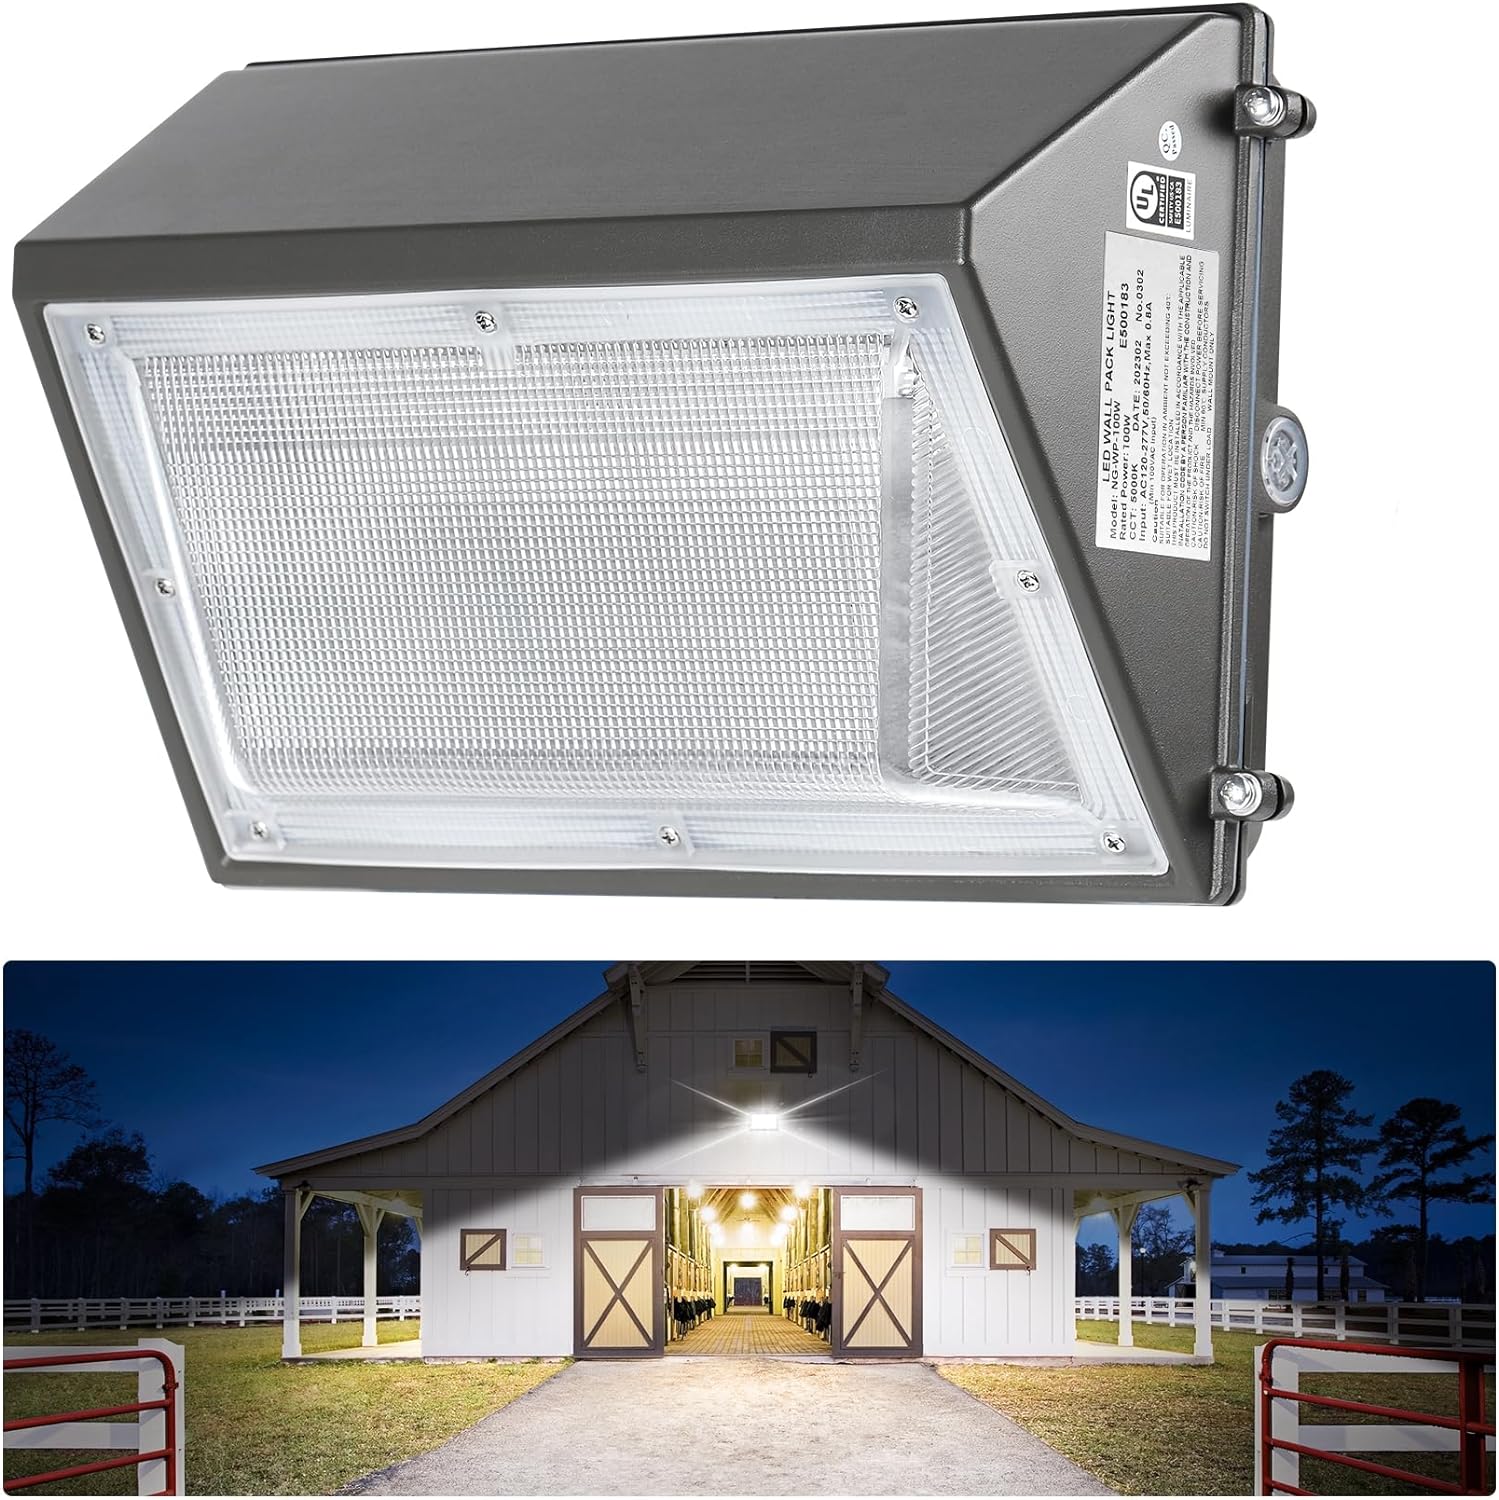 120W LED Wall Pack Light with Dusk-to-Dawn Photocell, 15600LM 5000K Daylight Commerical Security Lighting, IP65 Waterproof Wall Mount Outdoor Flood Light for Warehouse Factory Yard, UL ETL DLC Listed